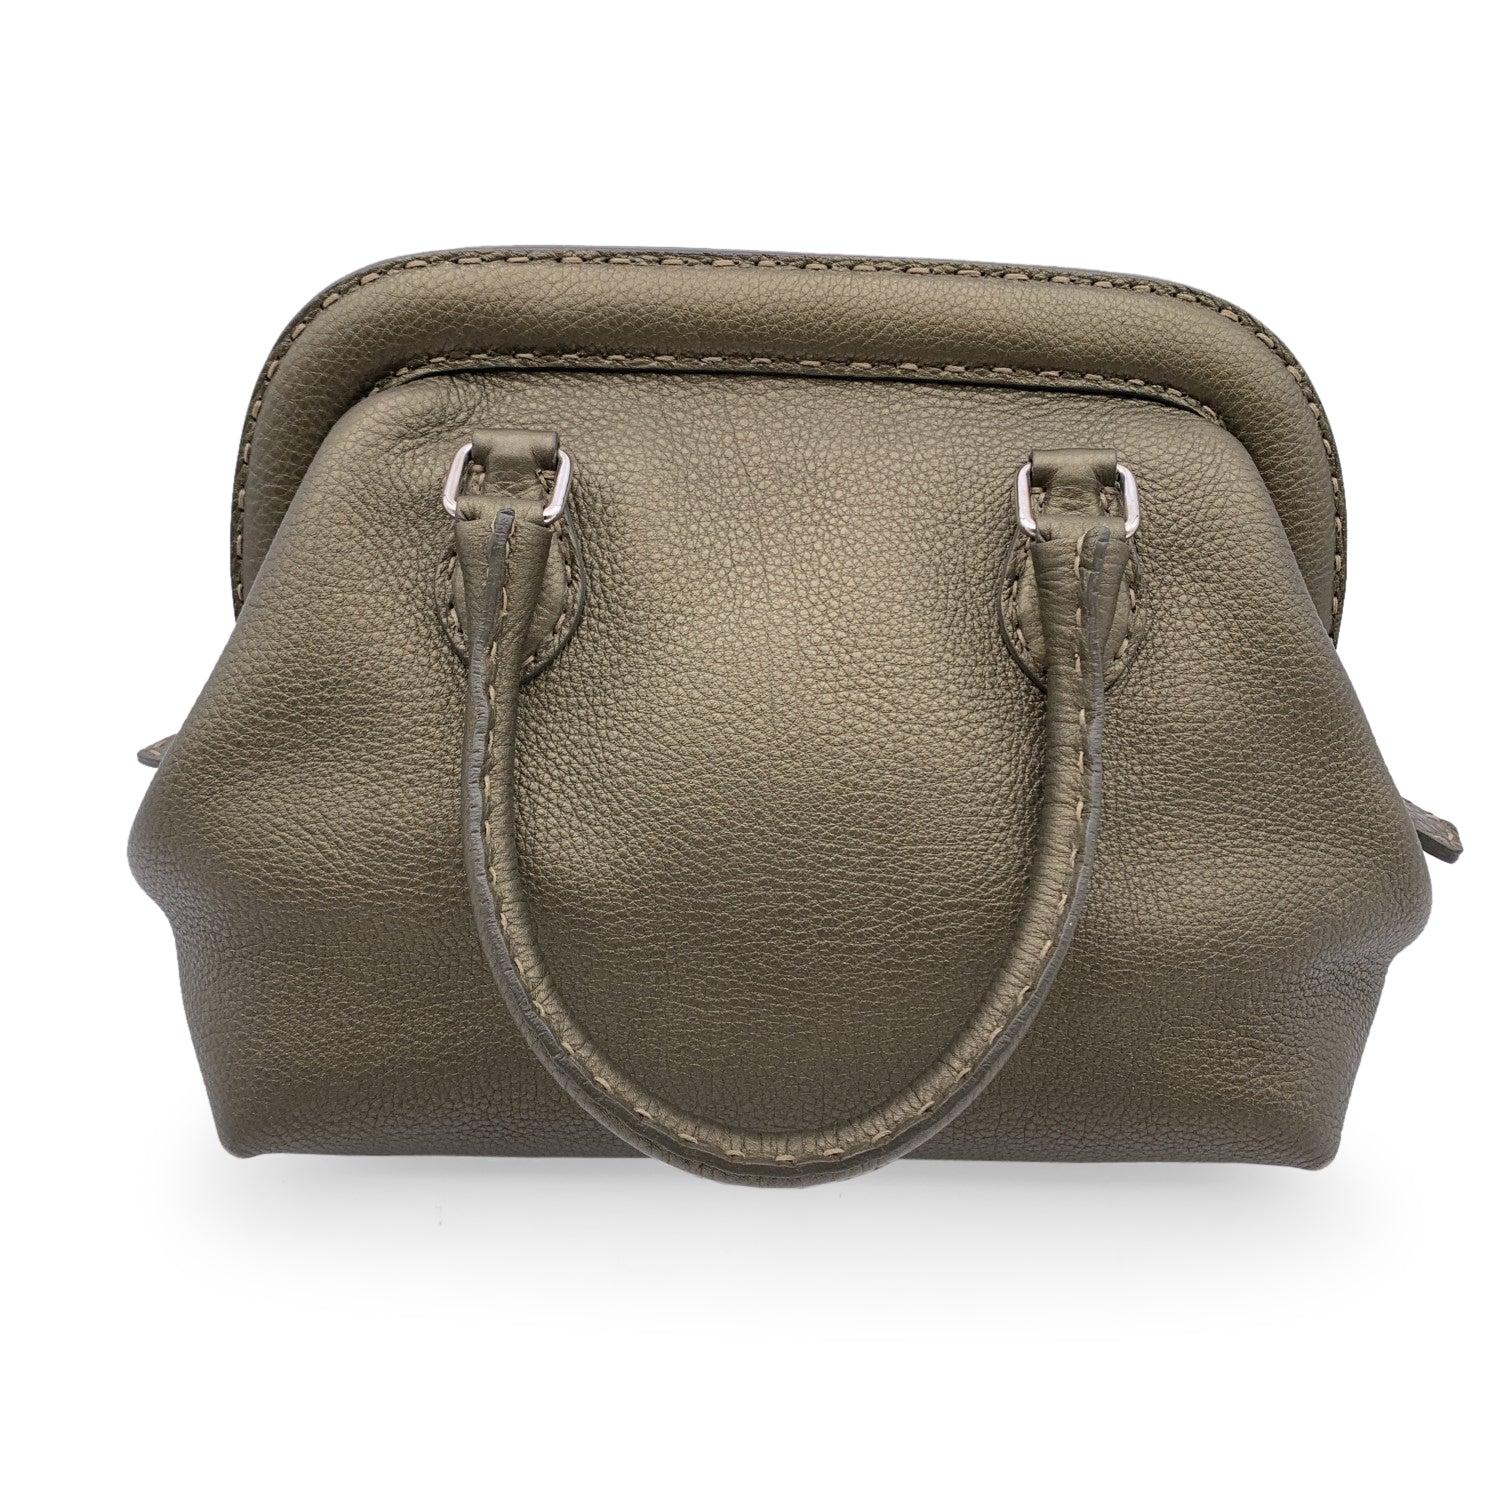 Fendi Selleria Military Green Leather Doctor Bag Handbag Satchel In Excellent Condition In Rome, Rome